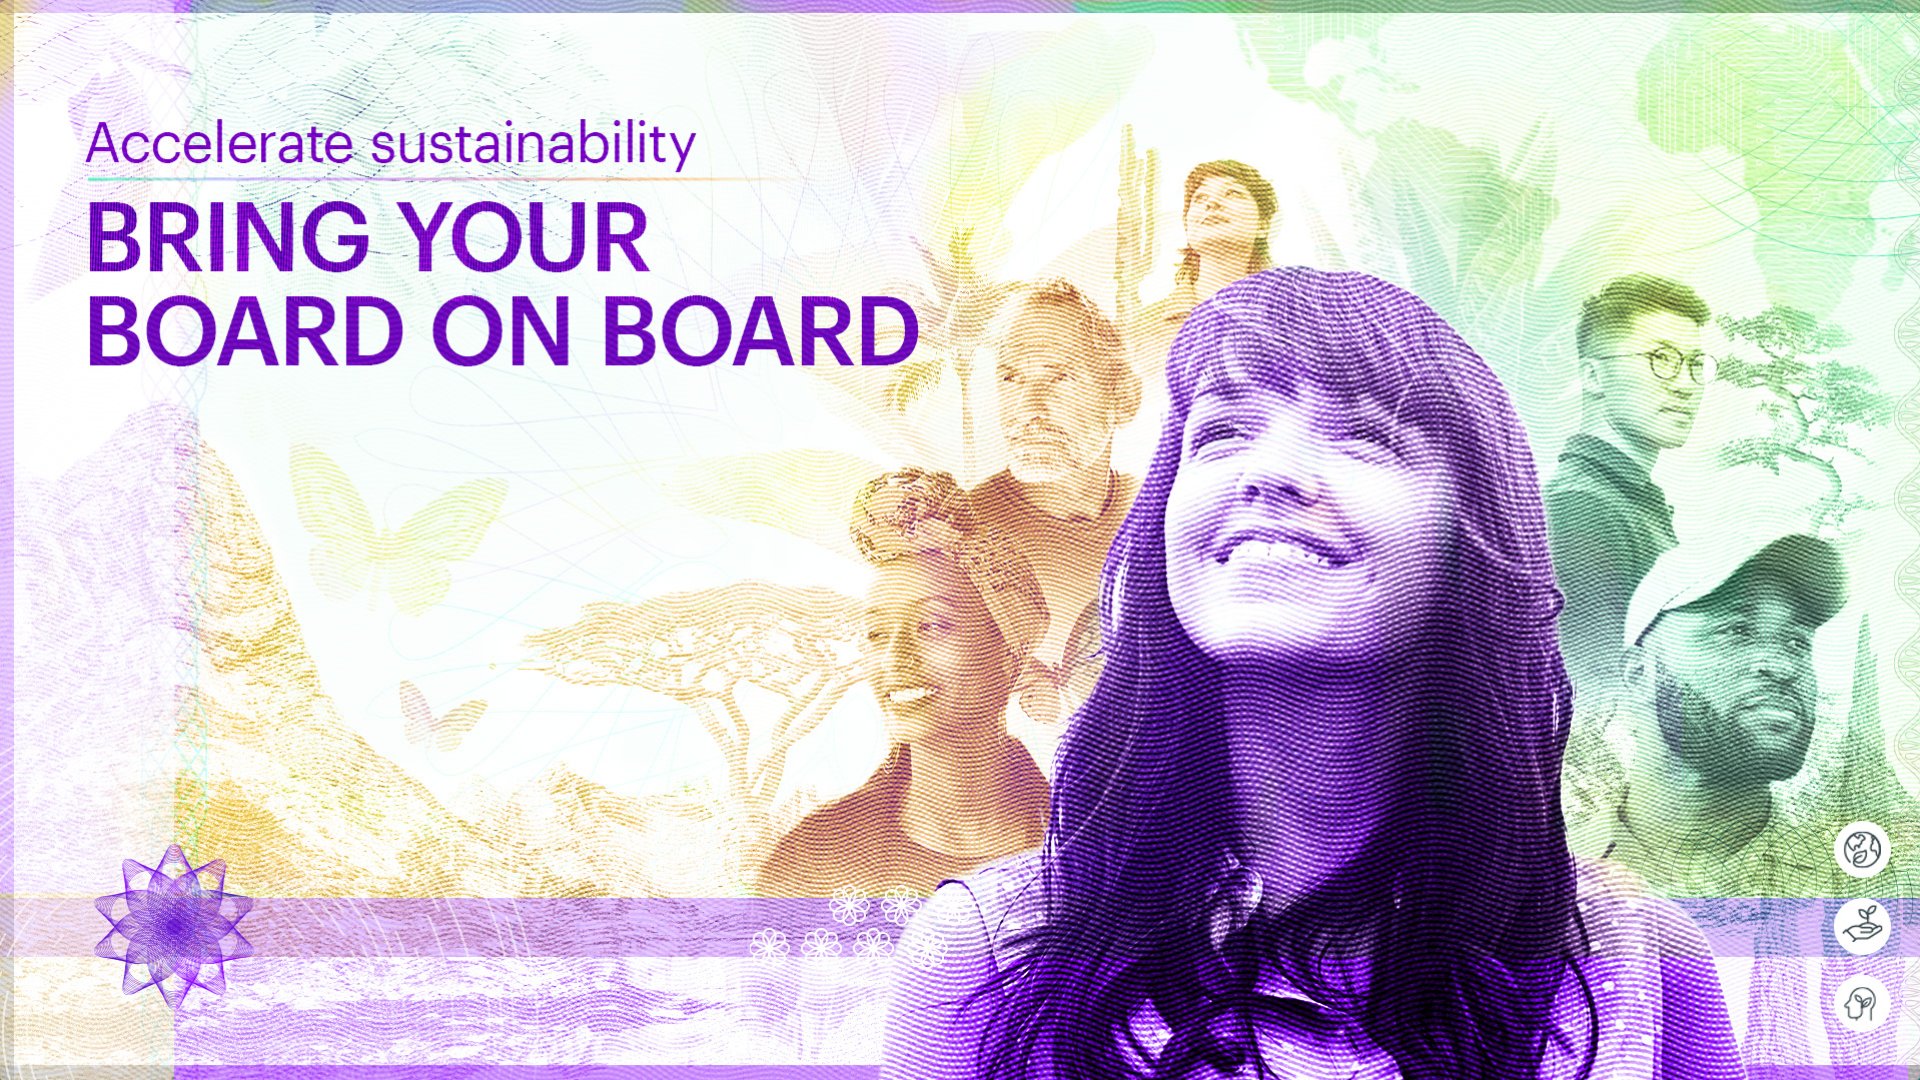 Accelerate sustainability: Bring your board on board